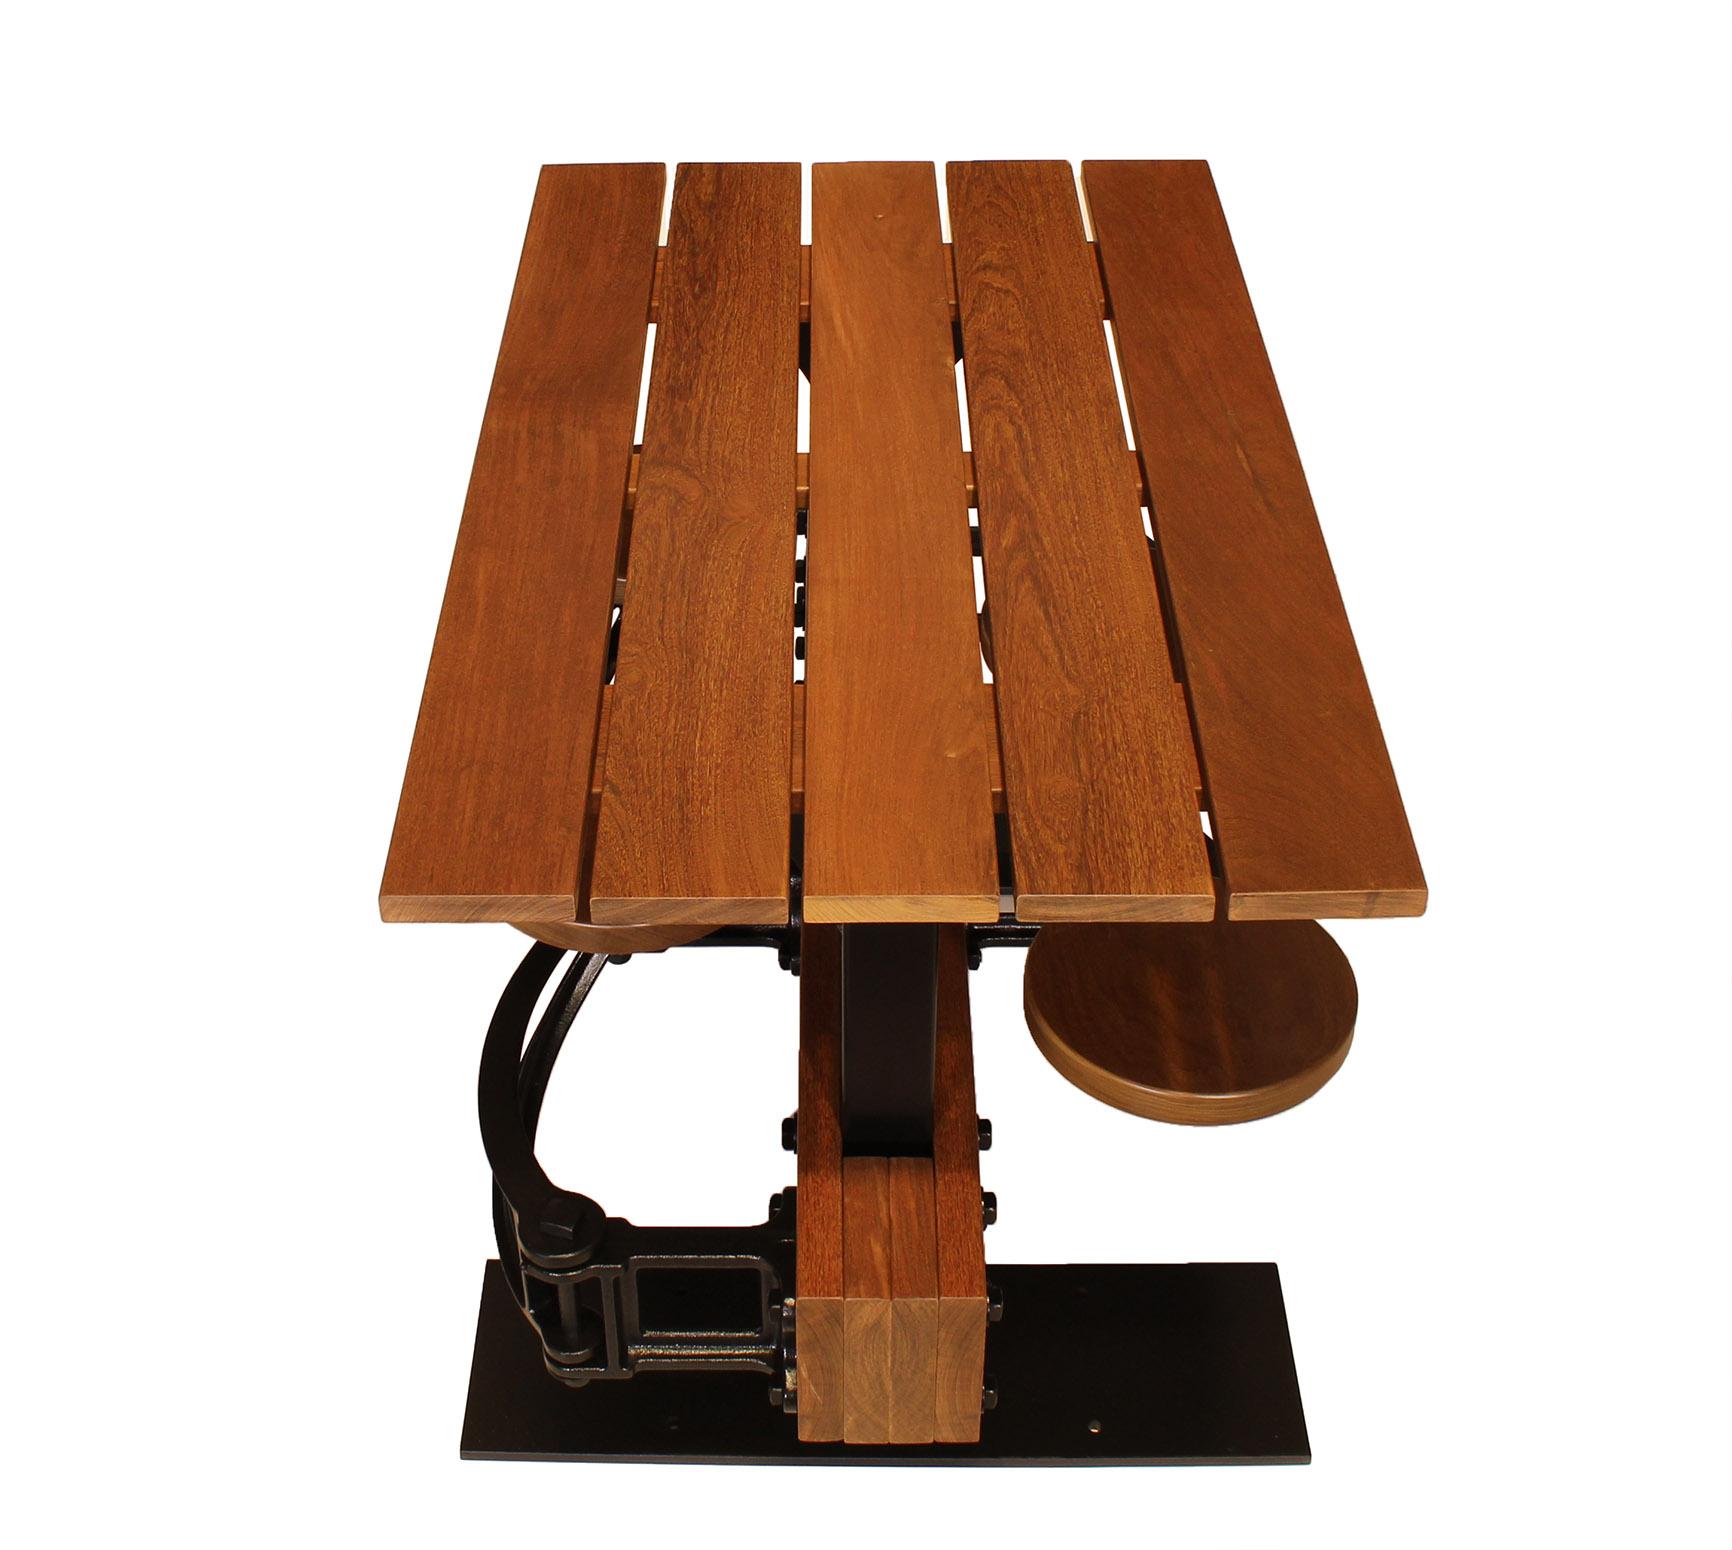 Iron Swing-Out Seat Outdoor Cafe Table Set For Sale